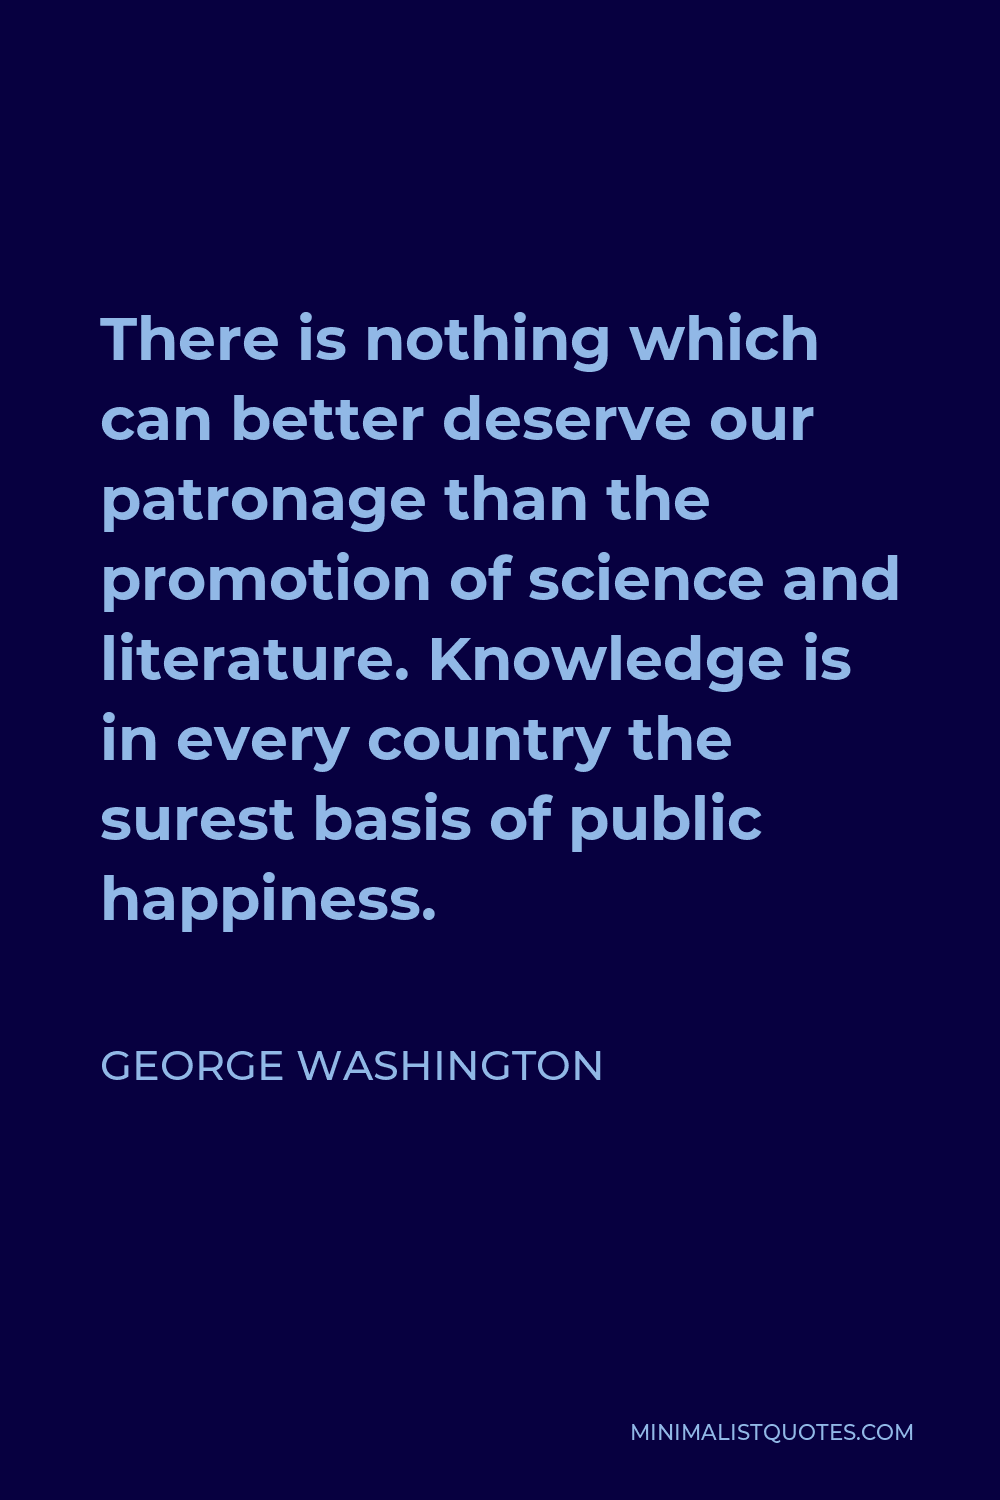 George Washington Quote - There is nothing which can better deserve our patronage than the promotion of science and literature. Knowledge is in every country the surest basis of public happiness.